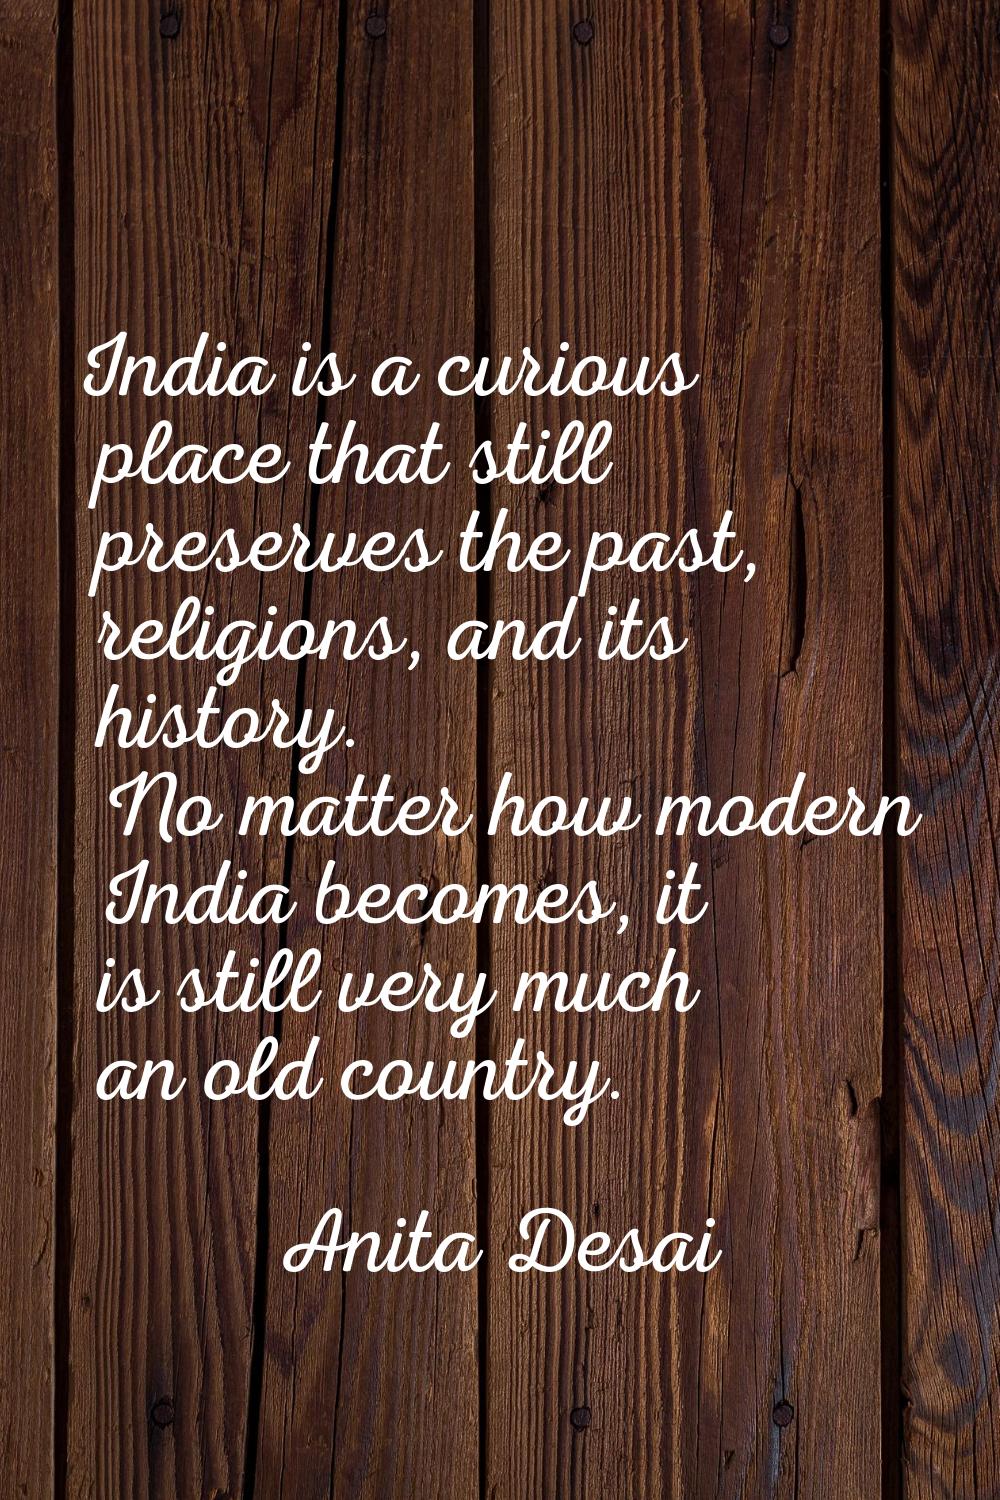 India is a curious place that still preserves the past, religions, and its history. No matter how m